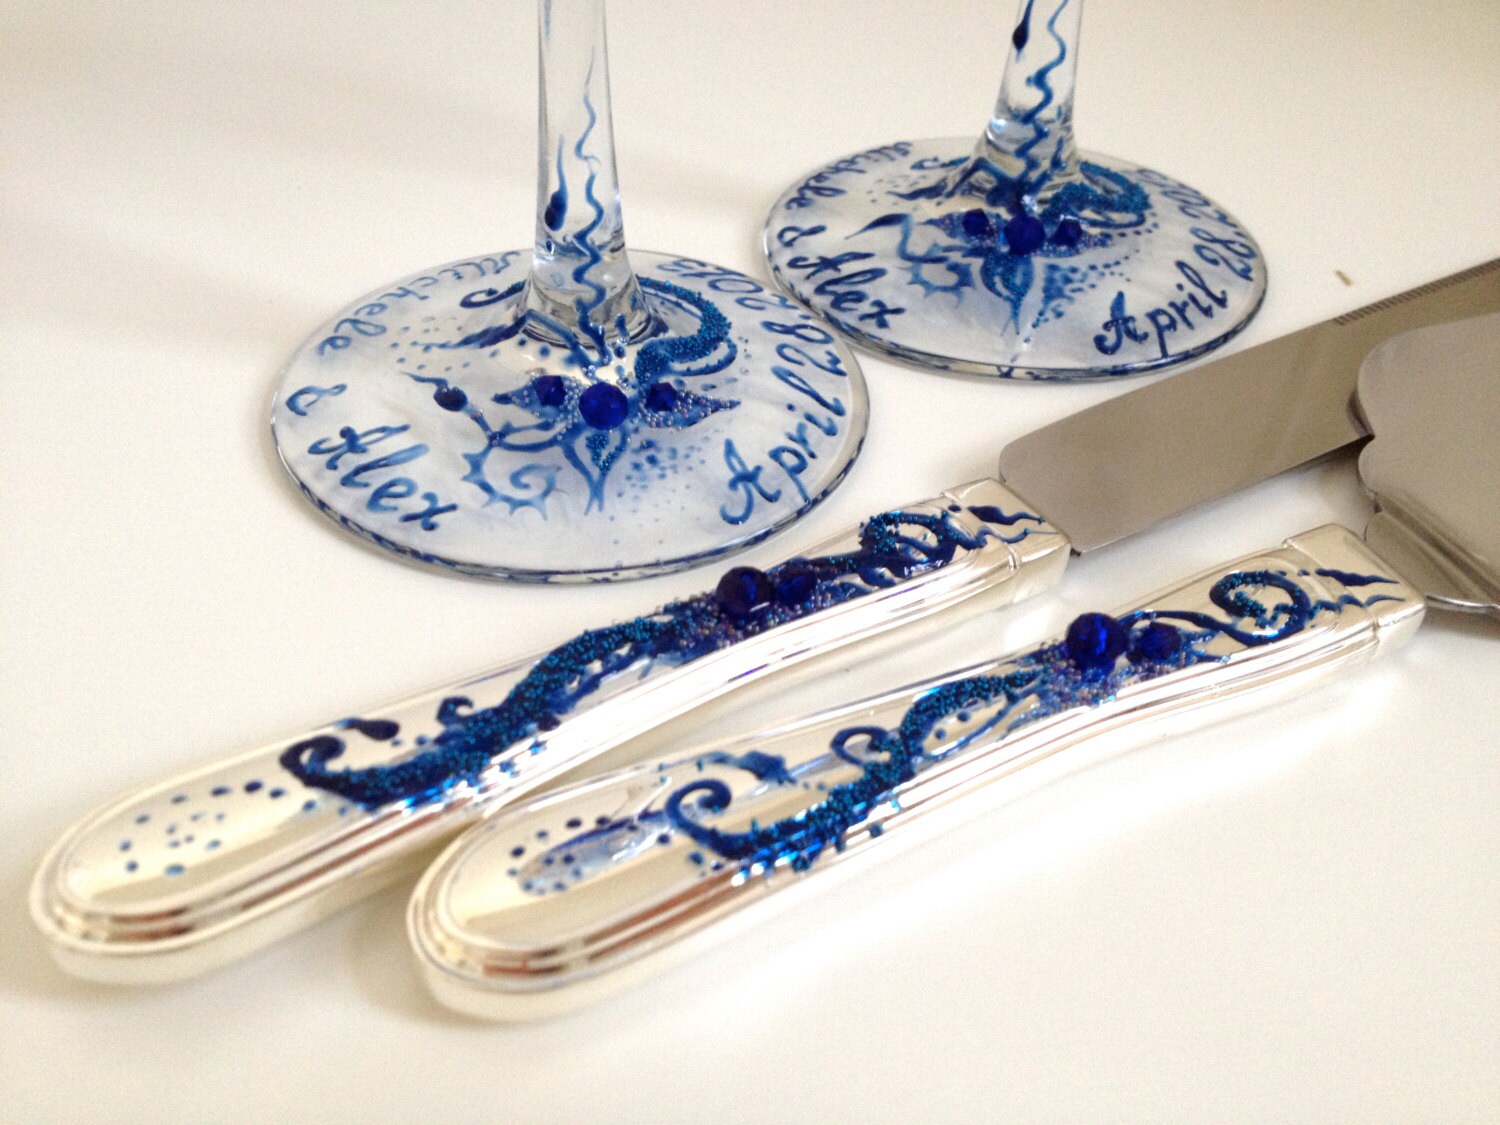  Wedding  cake  serving  set  hand decorated with royal blue